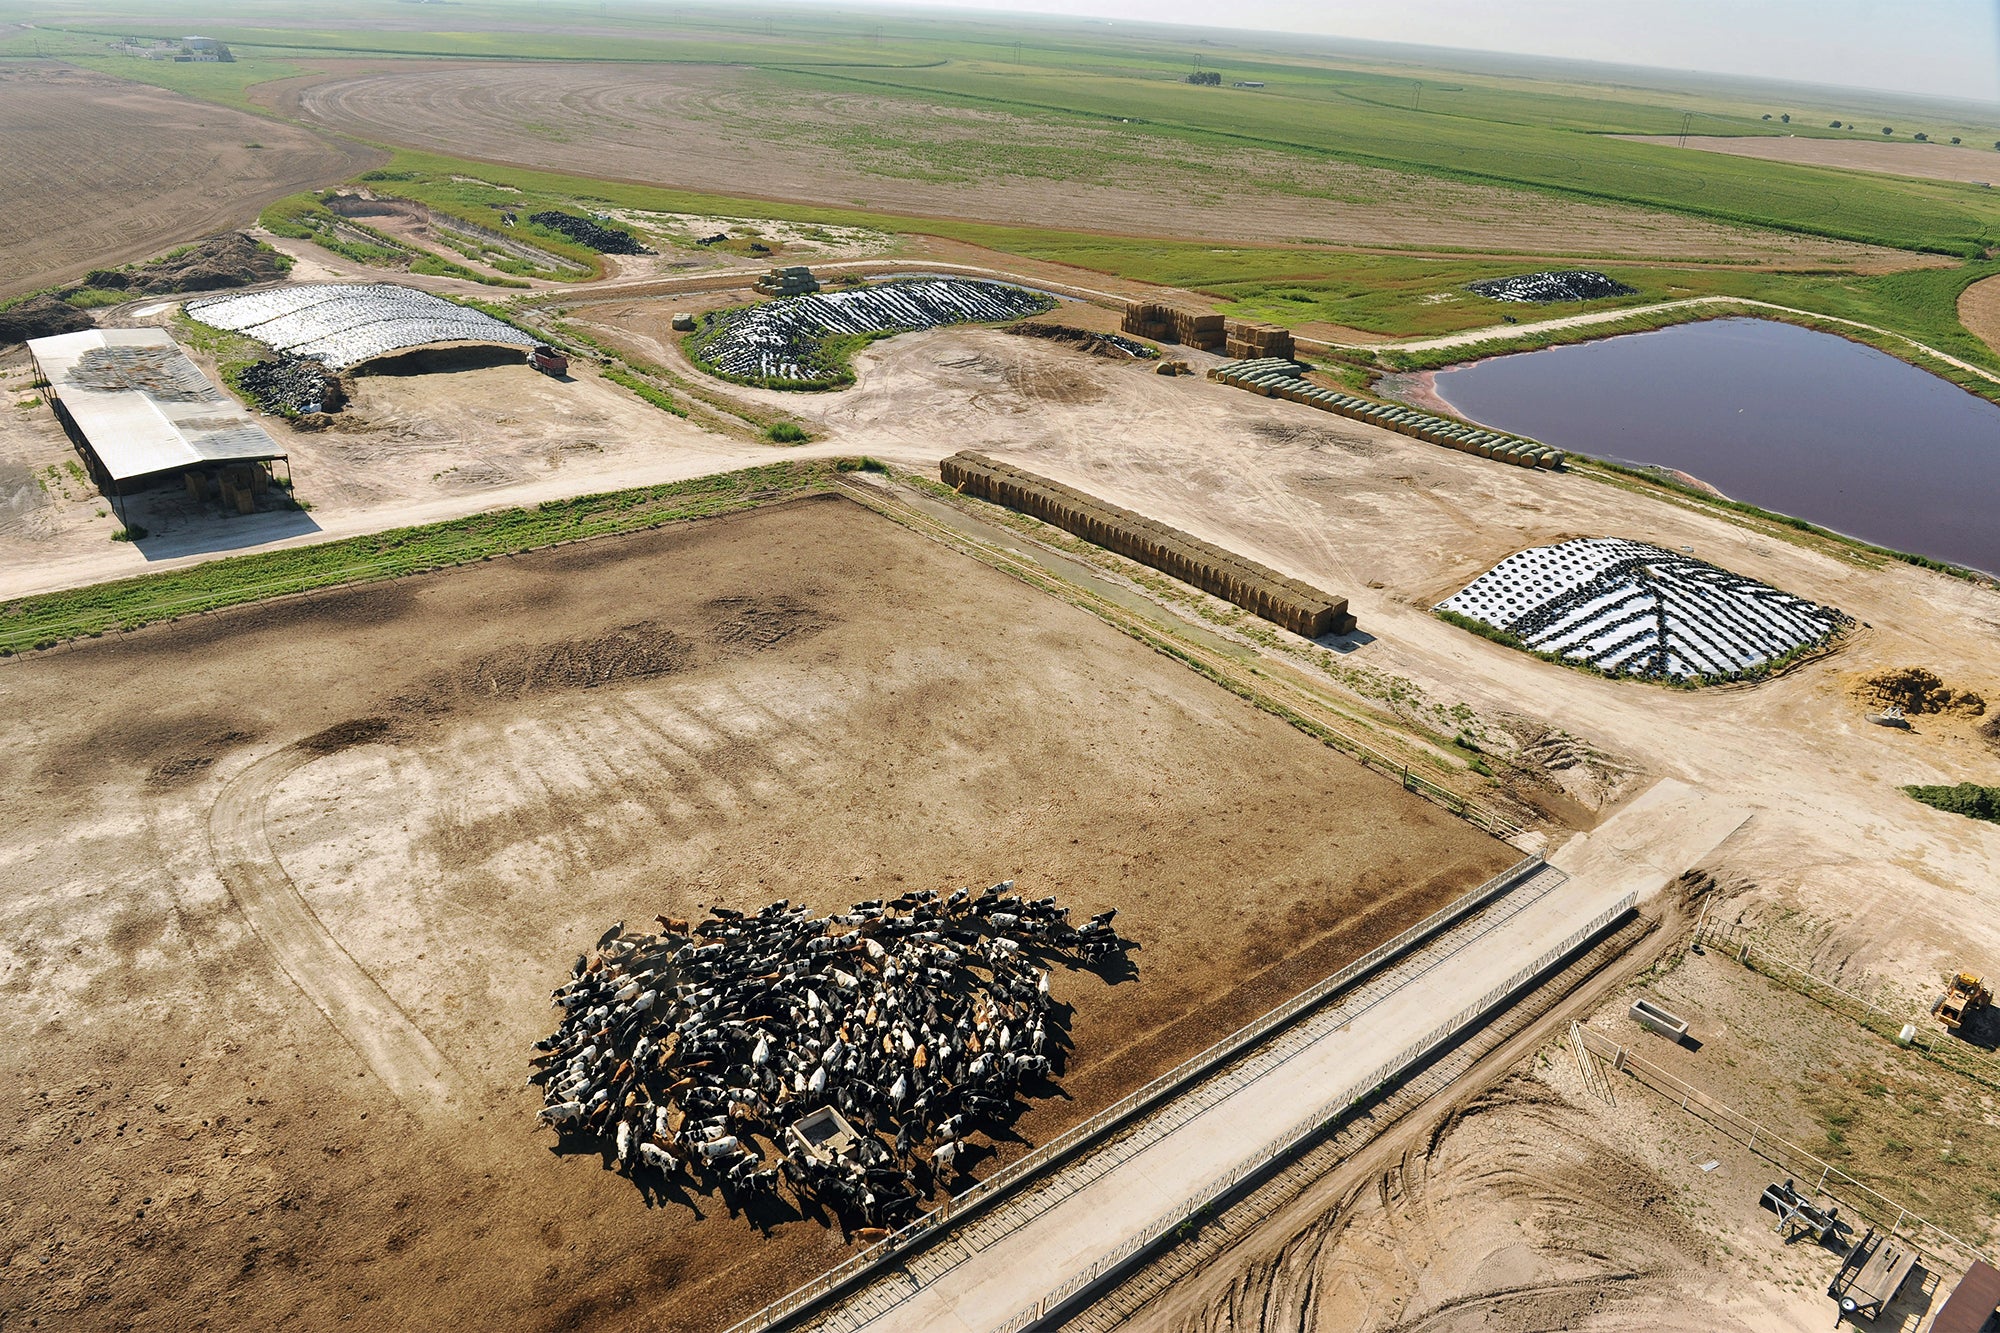 Expansive aerial view of a large organic farm in Texas with cattle huddled into a smaller area towards the bottom of the frame